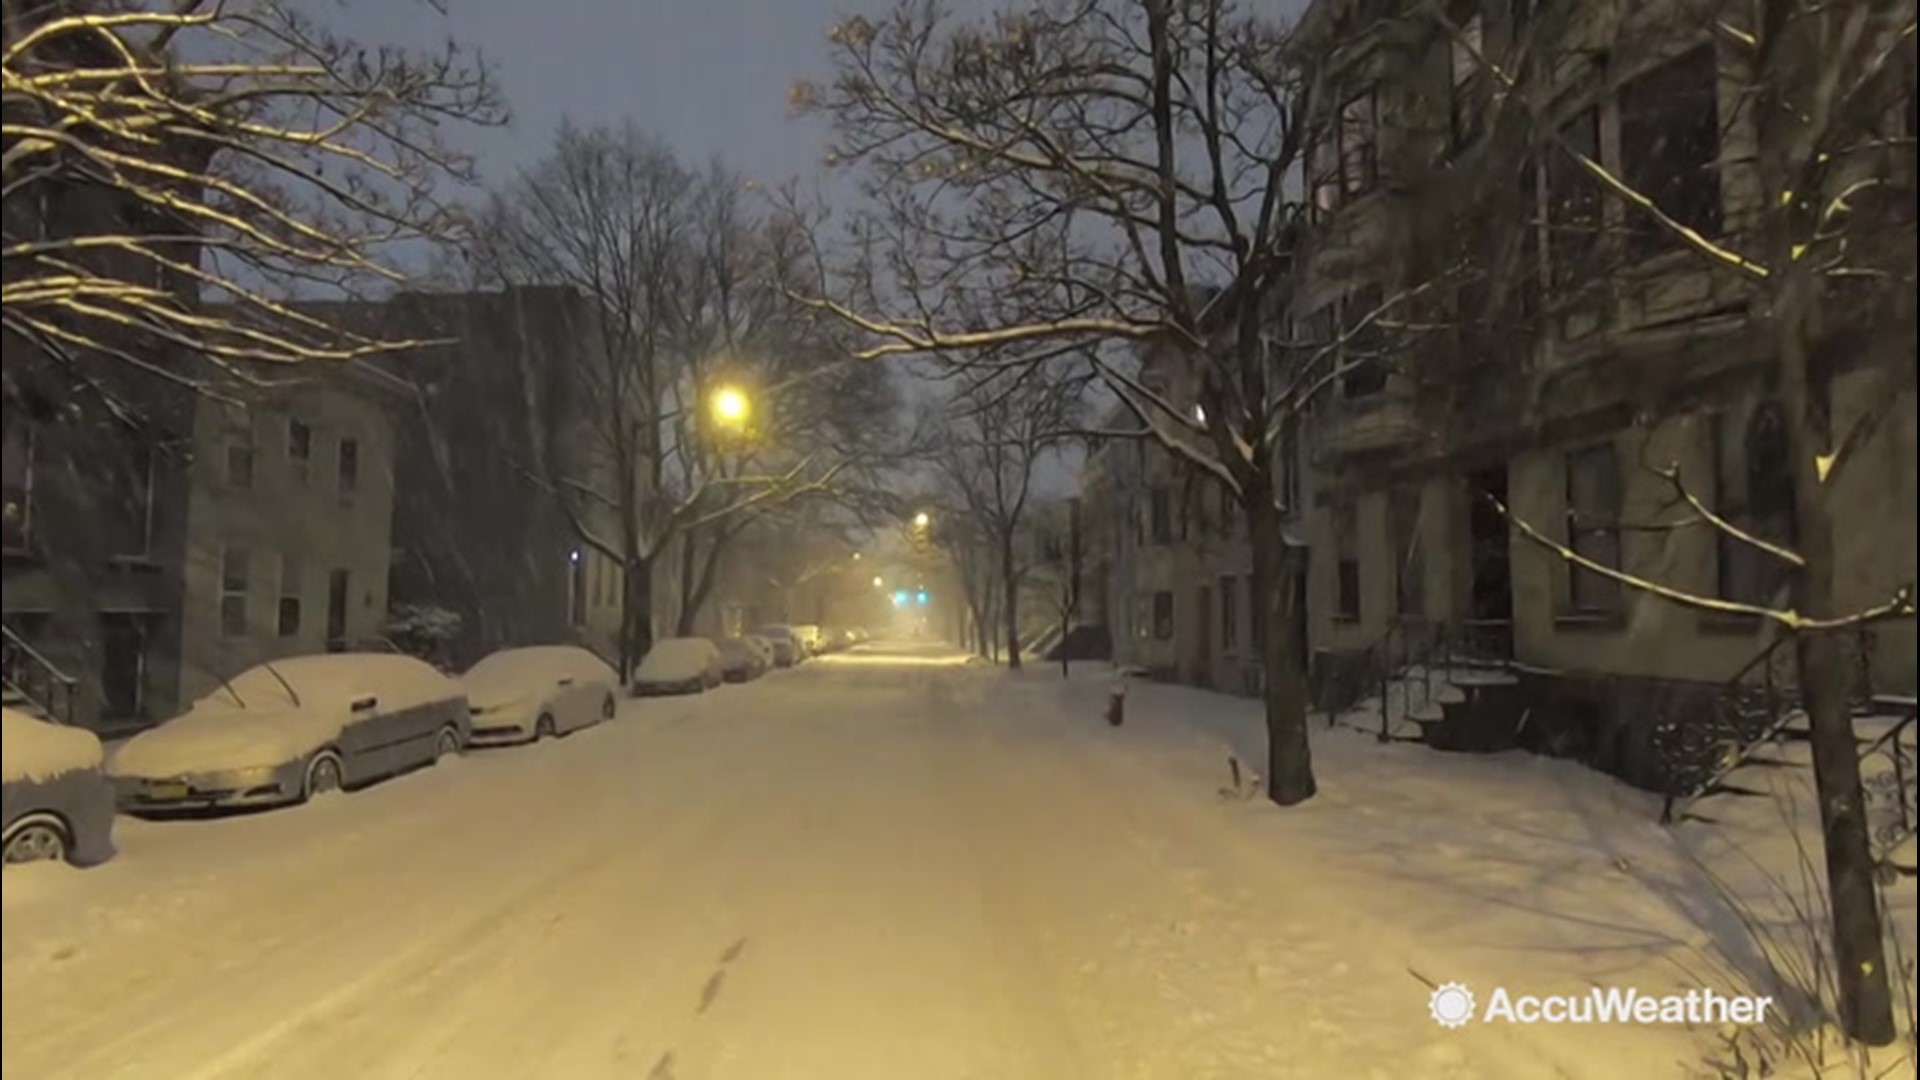 Accuweather's Dexter Henry recaps one of the biggest snowstorms in history to hit the state capital of New York.